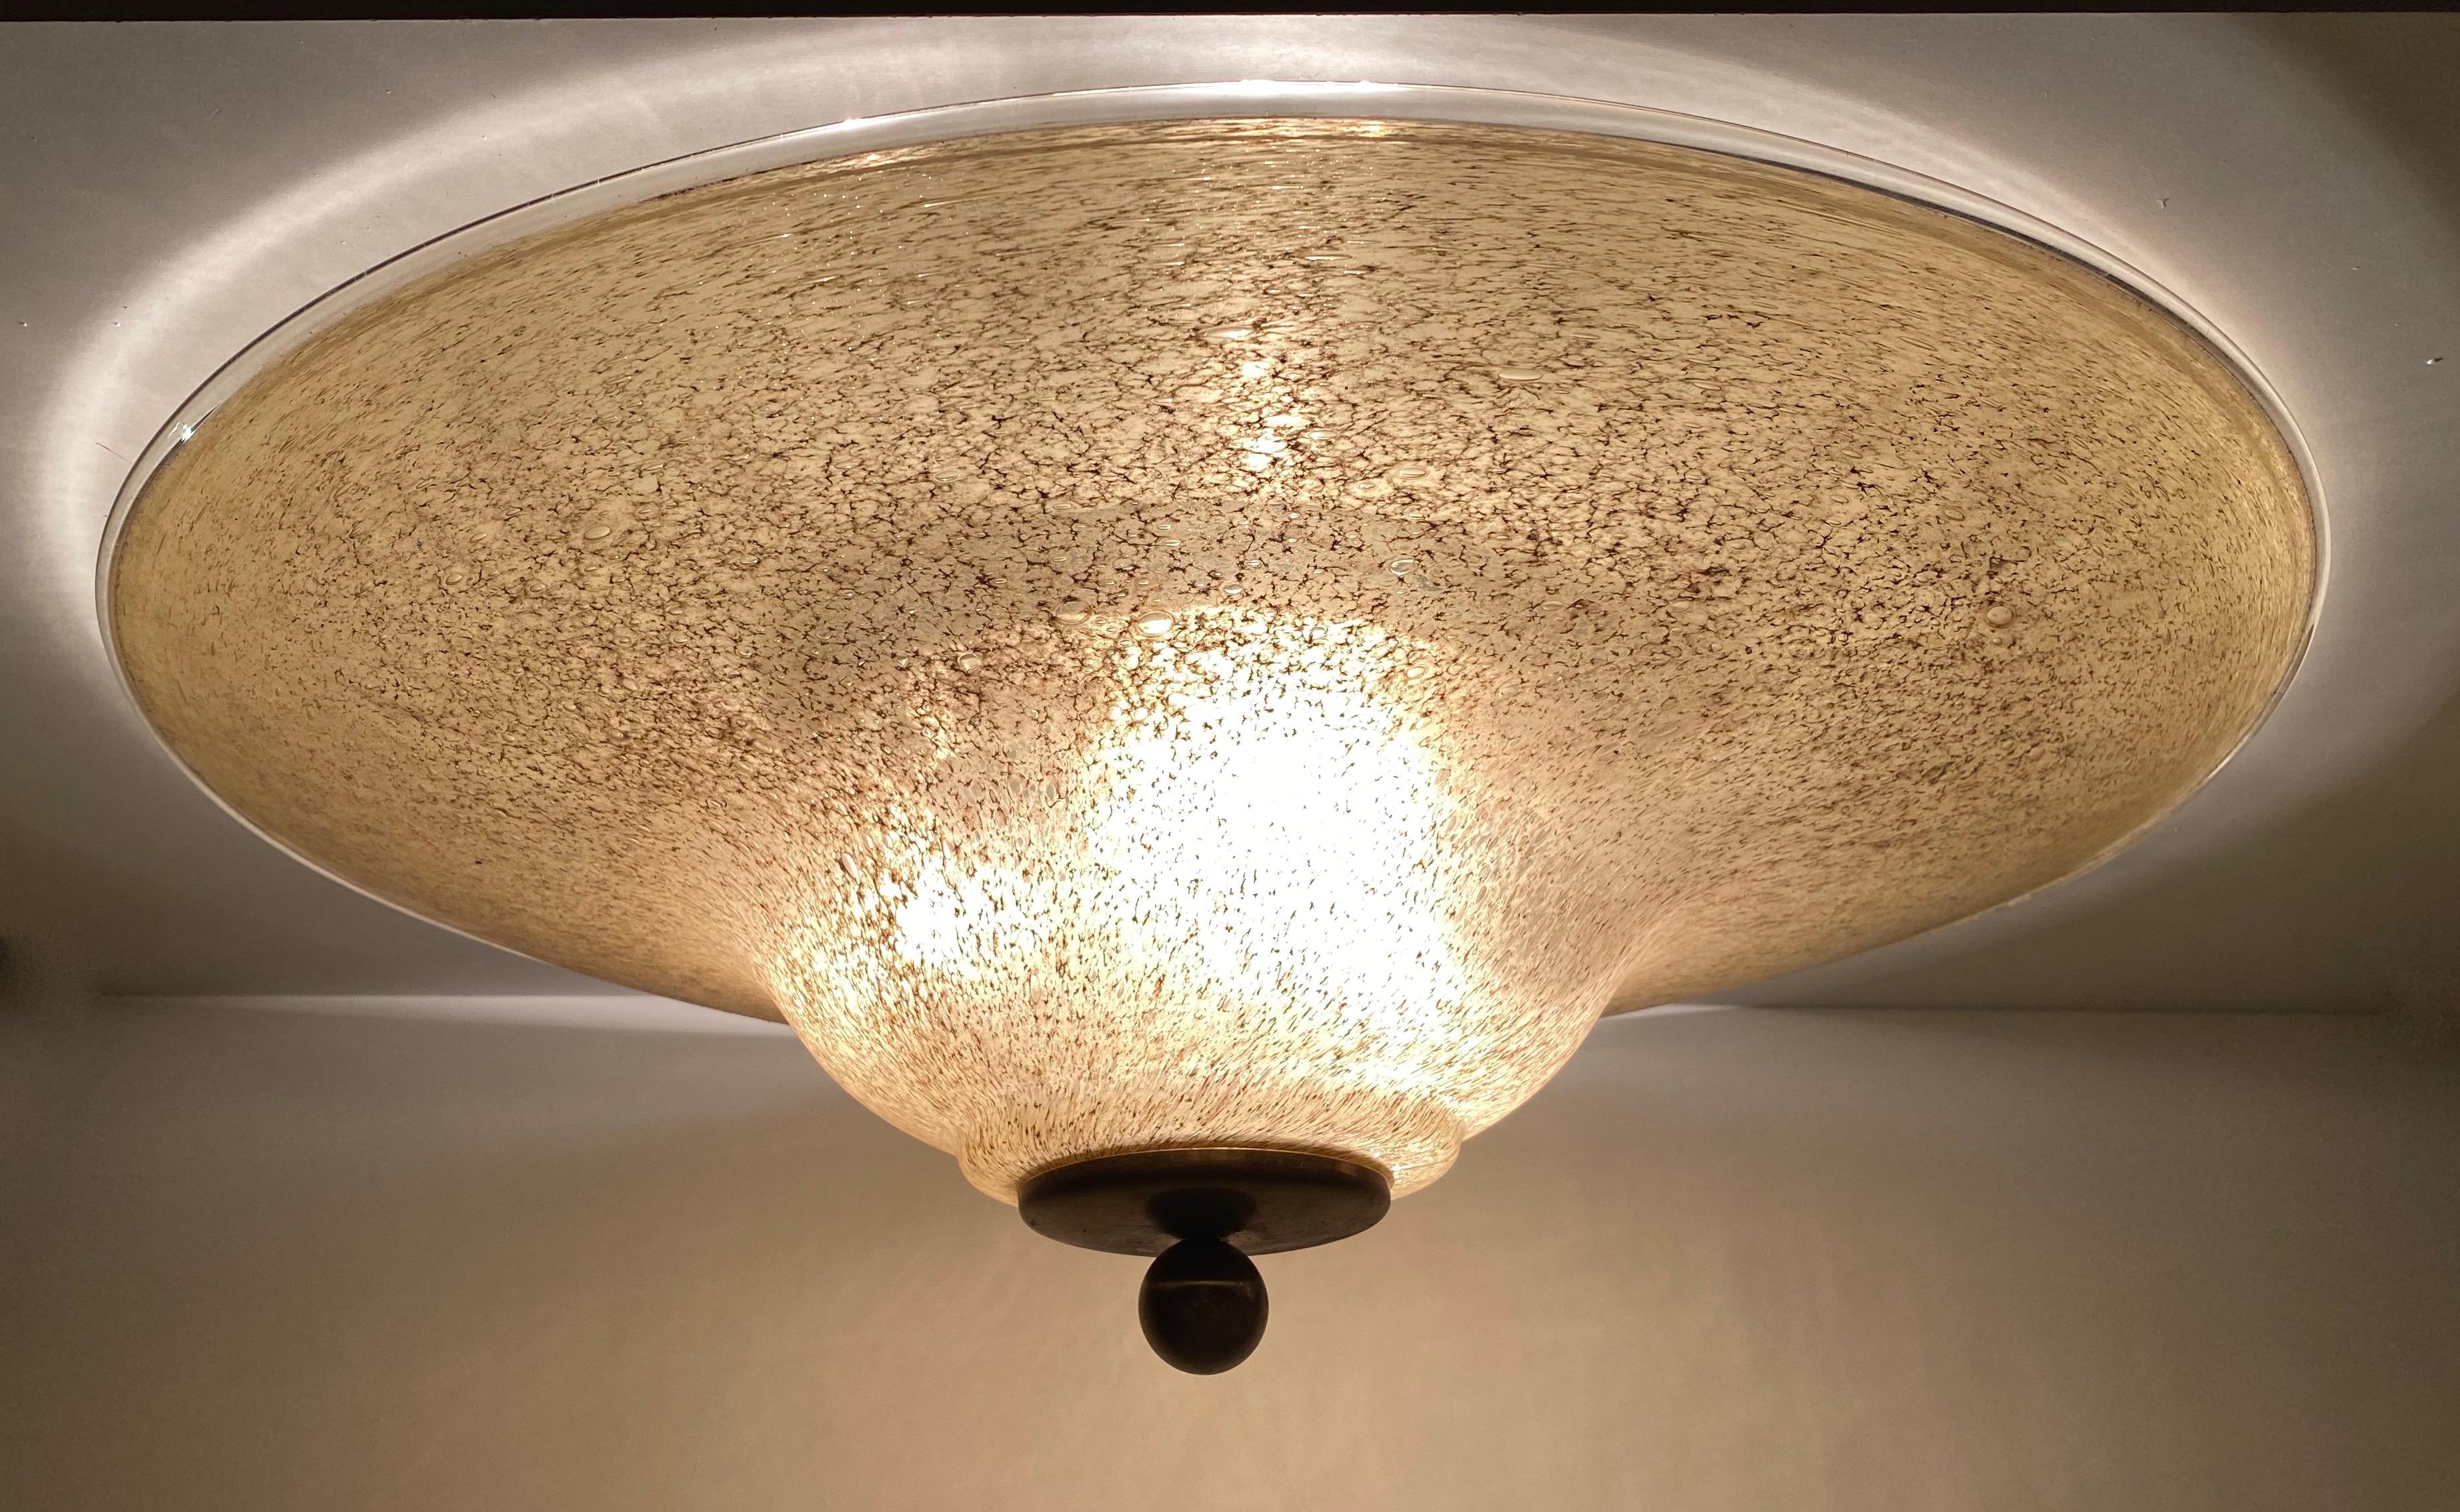 Gorgeous glass flush mount light made by Doria Leuchten, Germany. It is in very good condition, no chips, cracks and no repairs. The fixture requires three European E27 / 110 volt edison bulbs, each bulb up to 60 watts. It is marked with a label